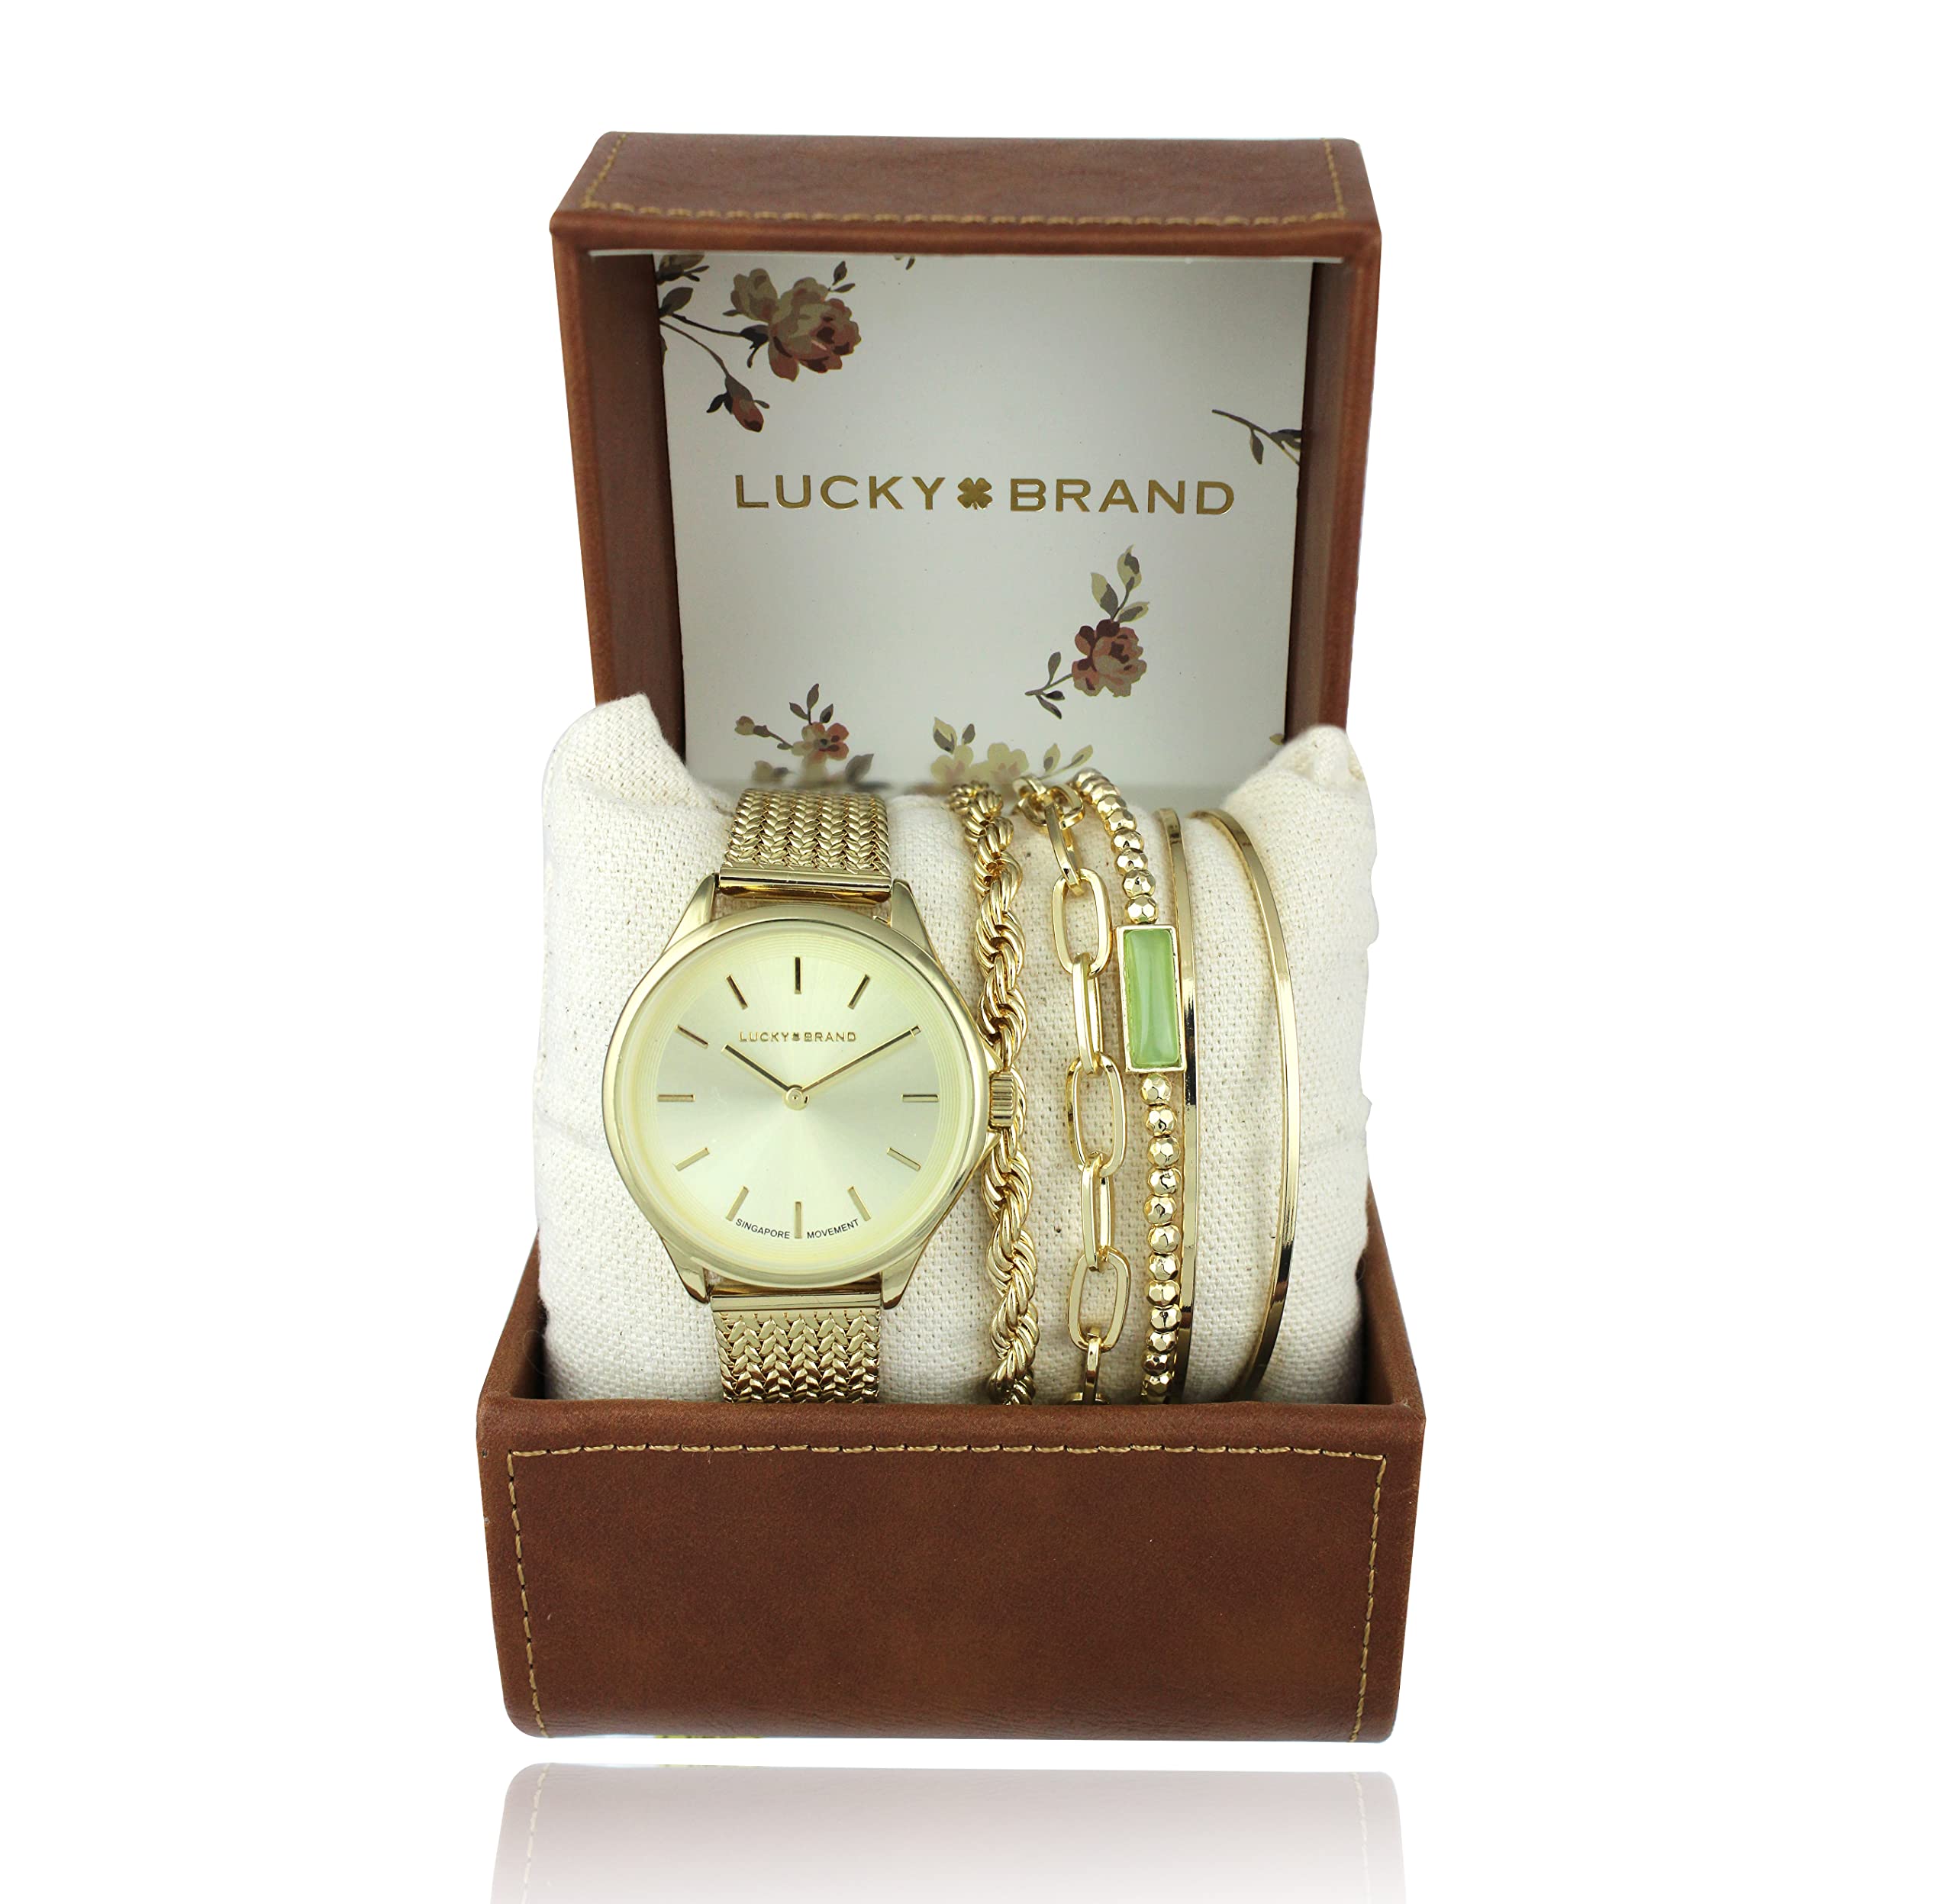 Lucky Brand Watches for Women Analog Display with Stainless Steel Strap Minimalist Watch Quartz Movement Women's Wrist Watches with Bracelet Gift Box Set